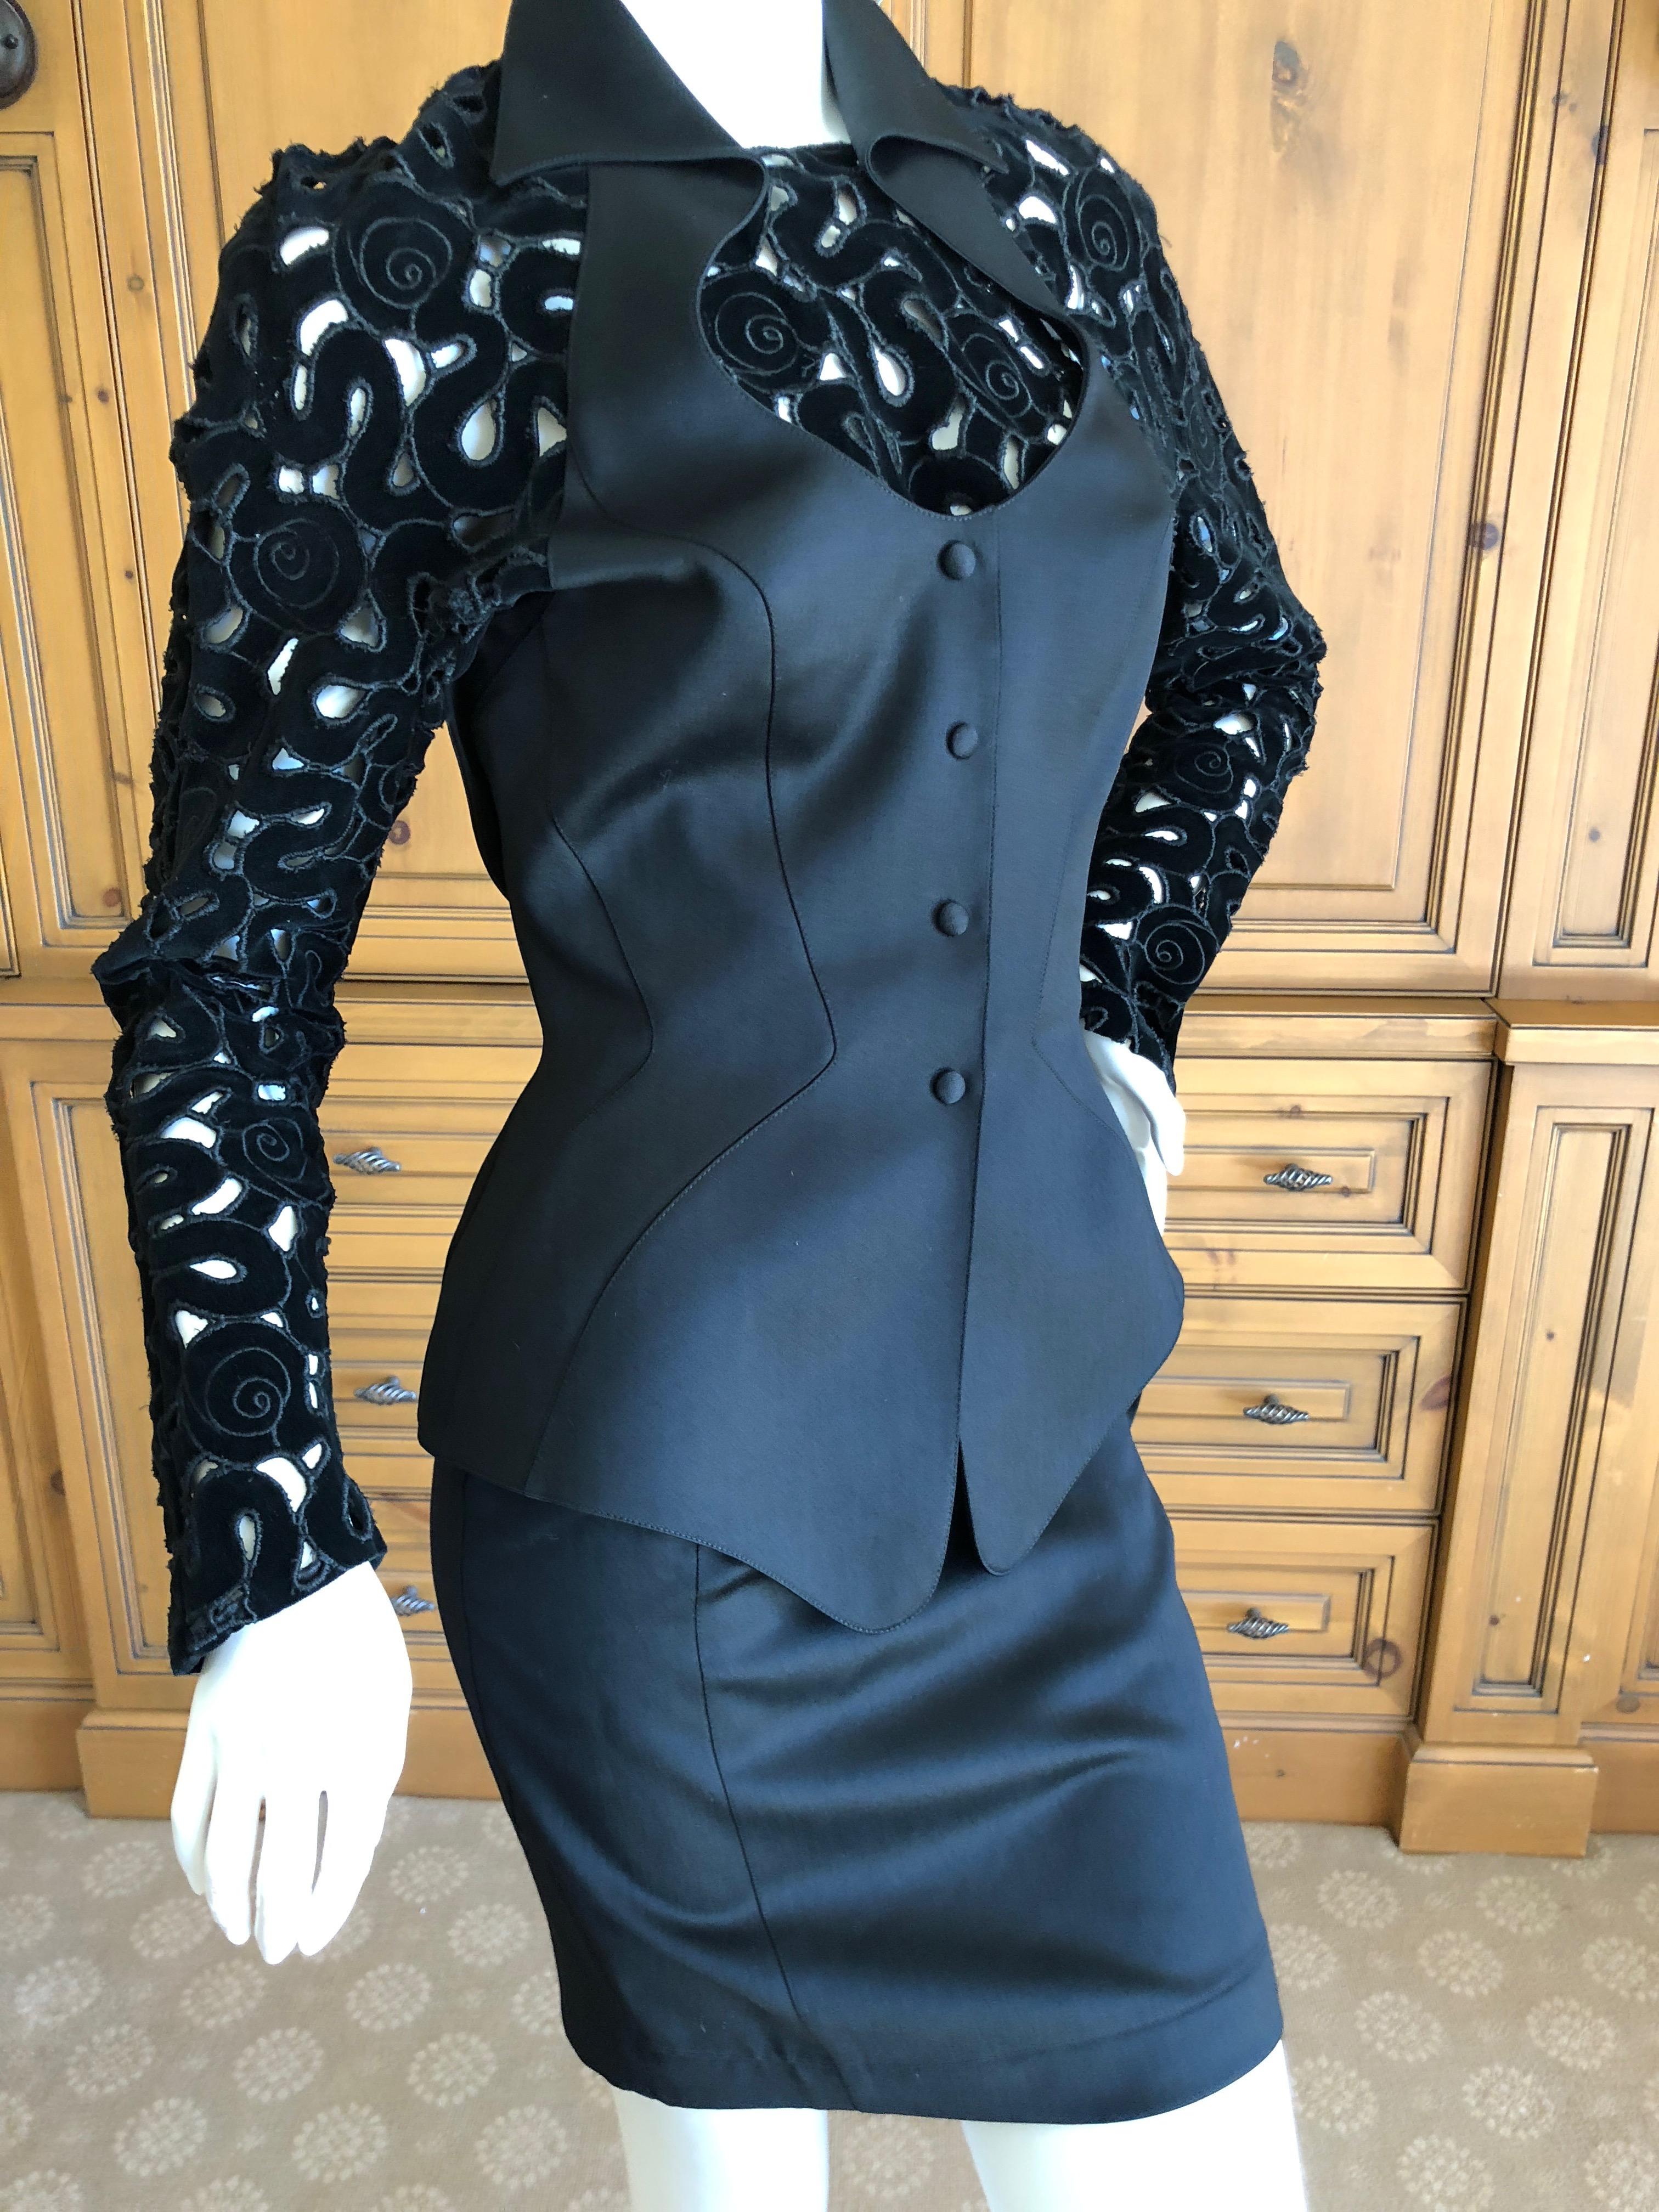 Thierry Mugler Paris 1980's Structured Black Suit w Devore Velvet Details 
The sheer velvet plaquette at the bust snaps in place, wear with or with out
Sz 36

 Classic Mugler 
Jacket
Bust 34